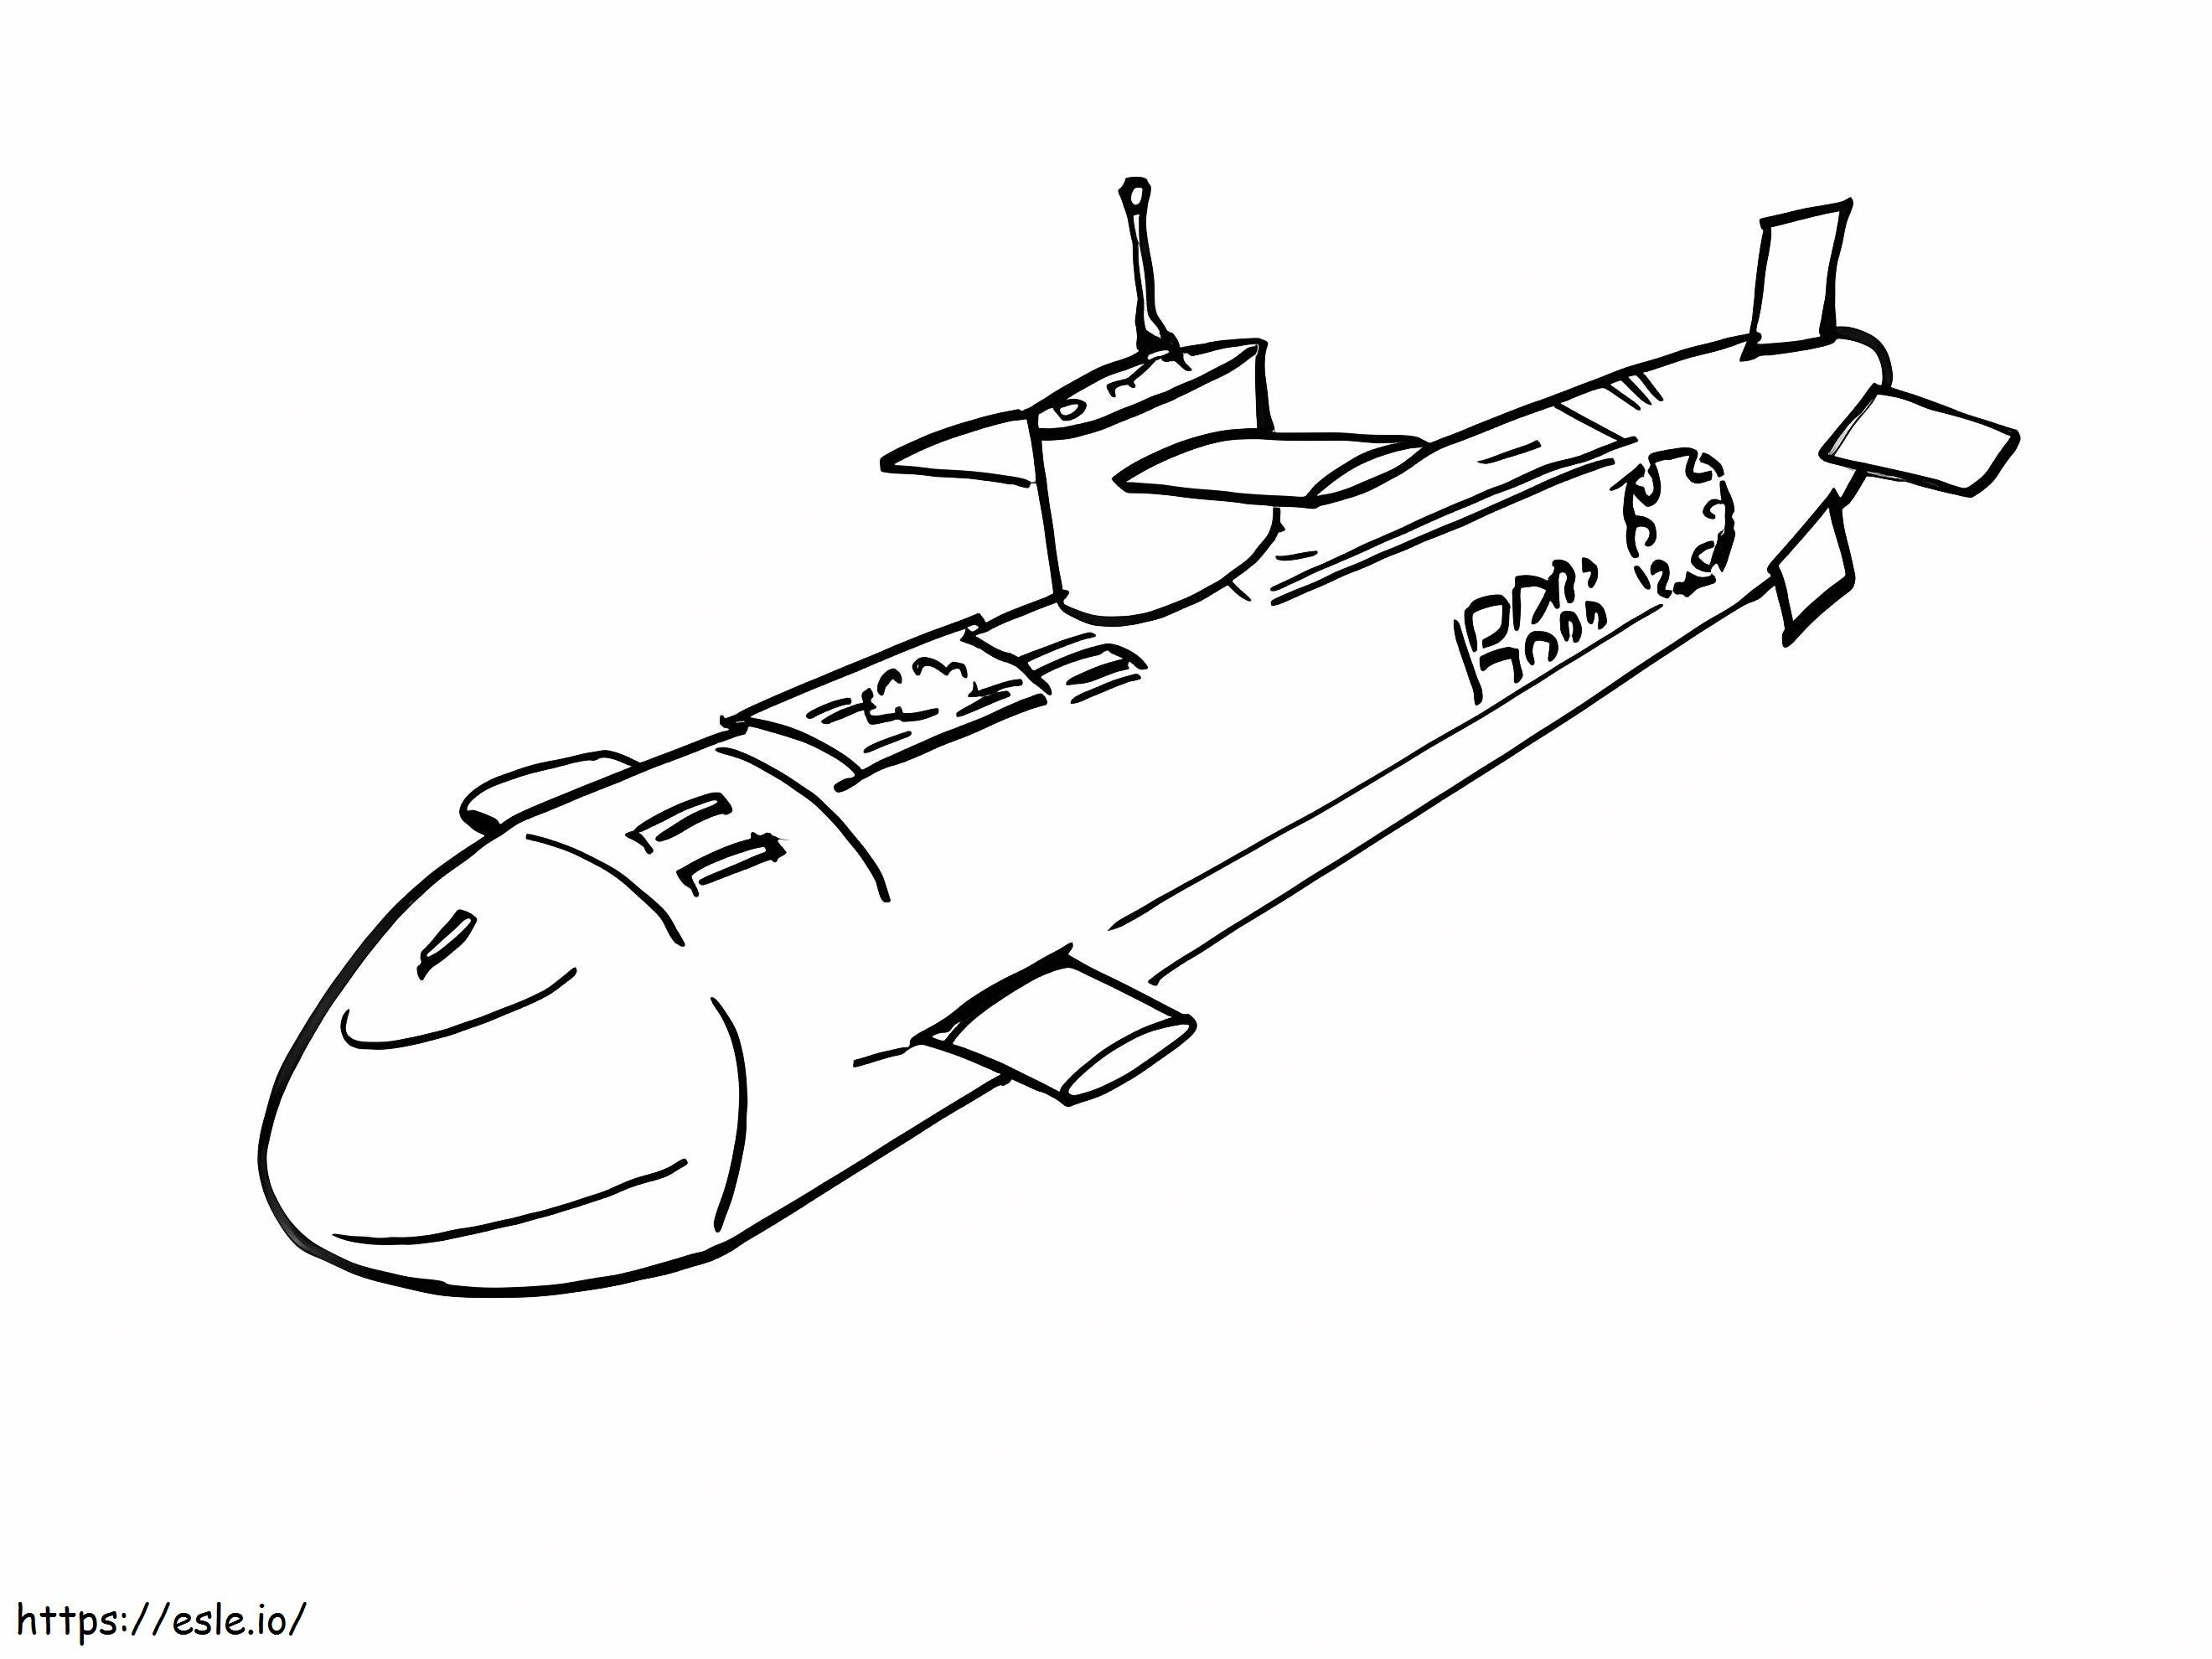 Military Submarine coloring page